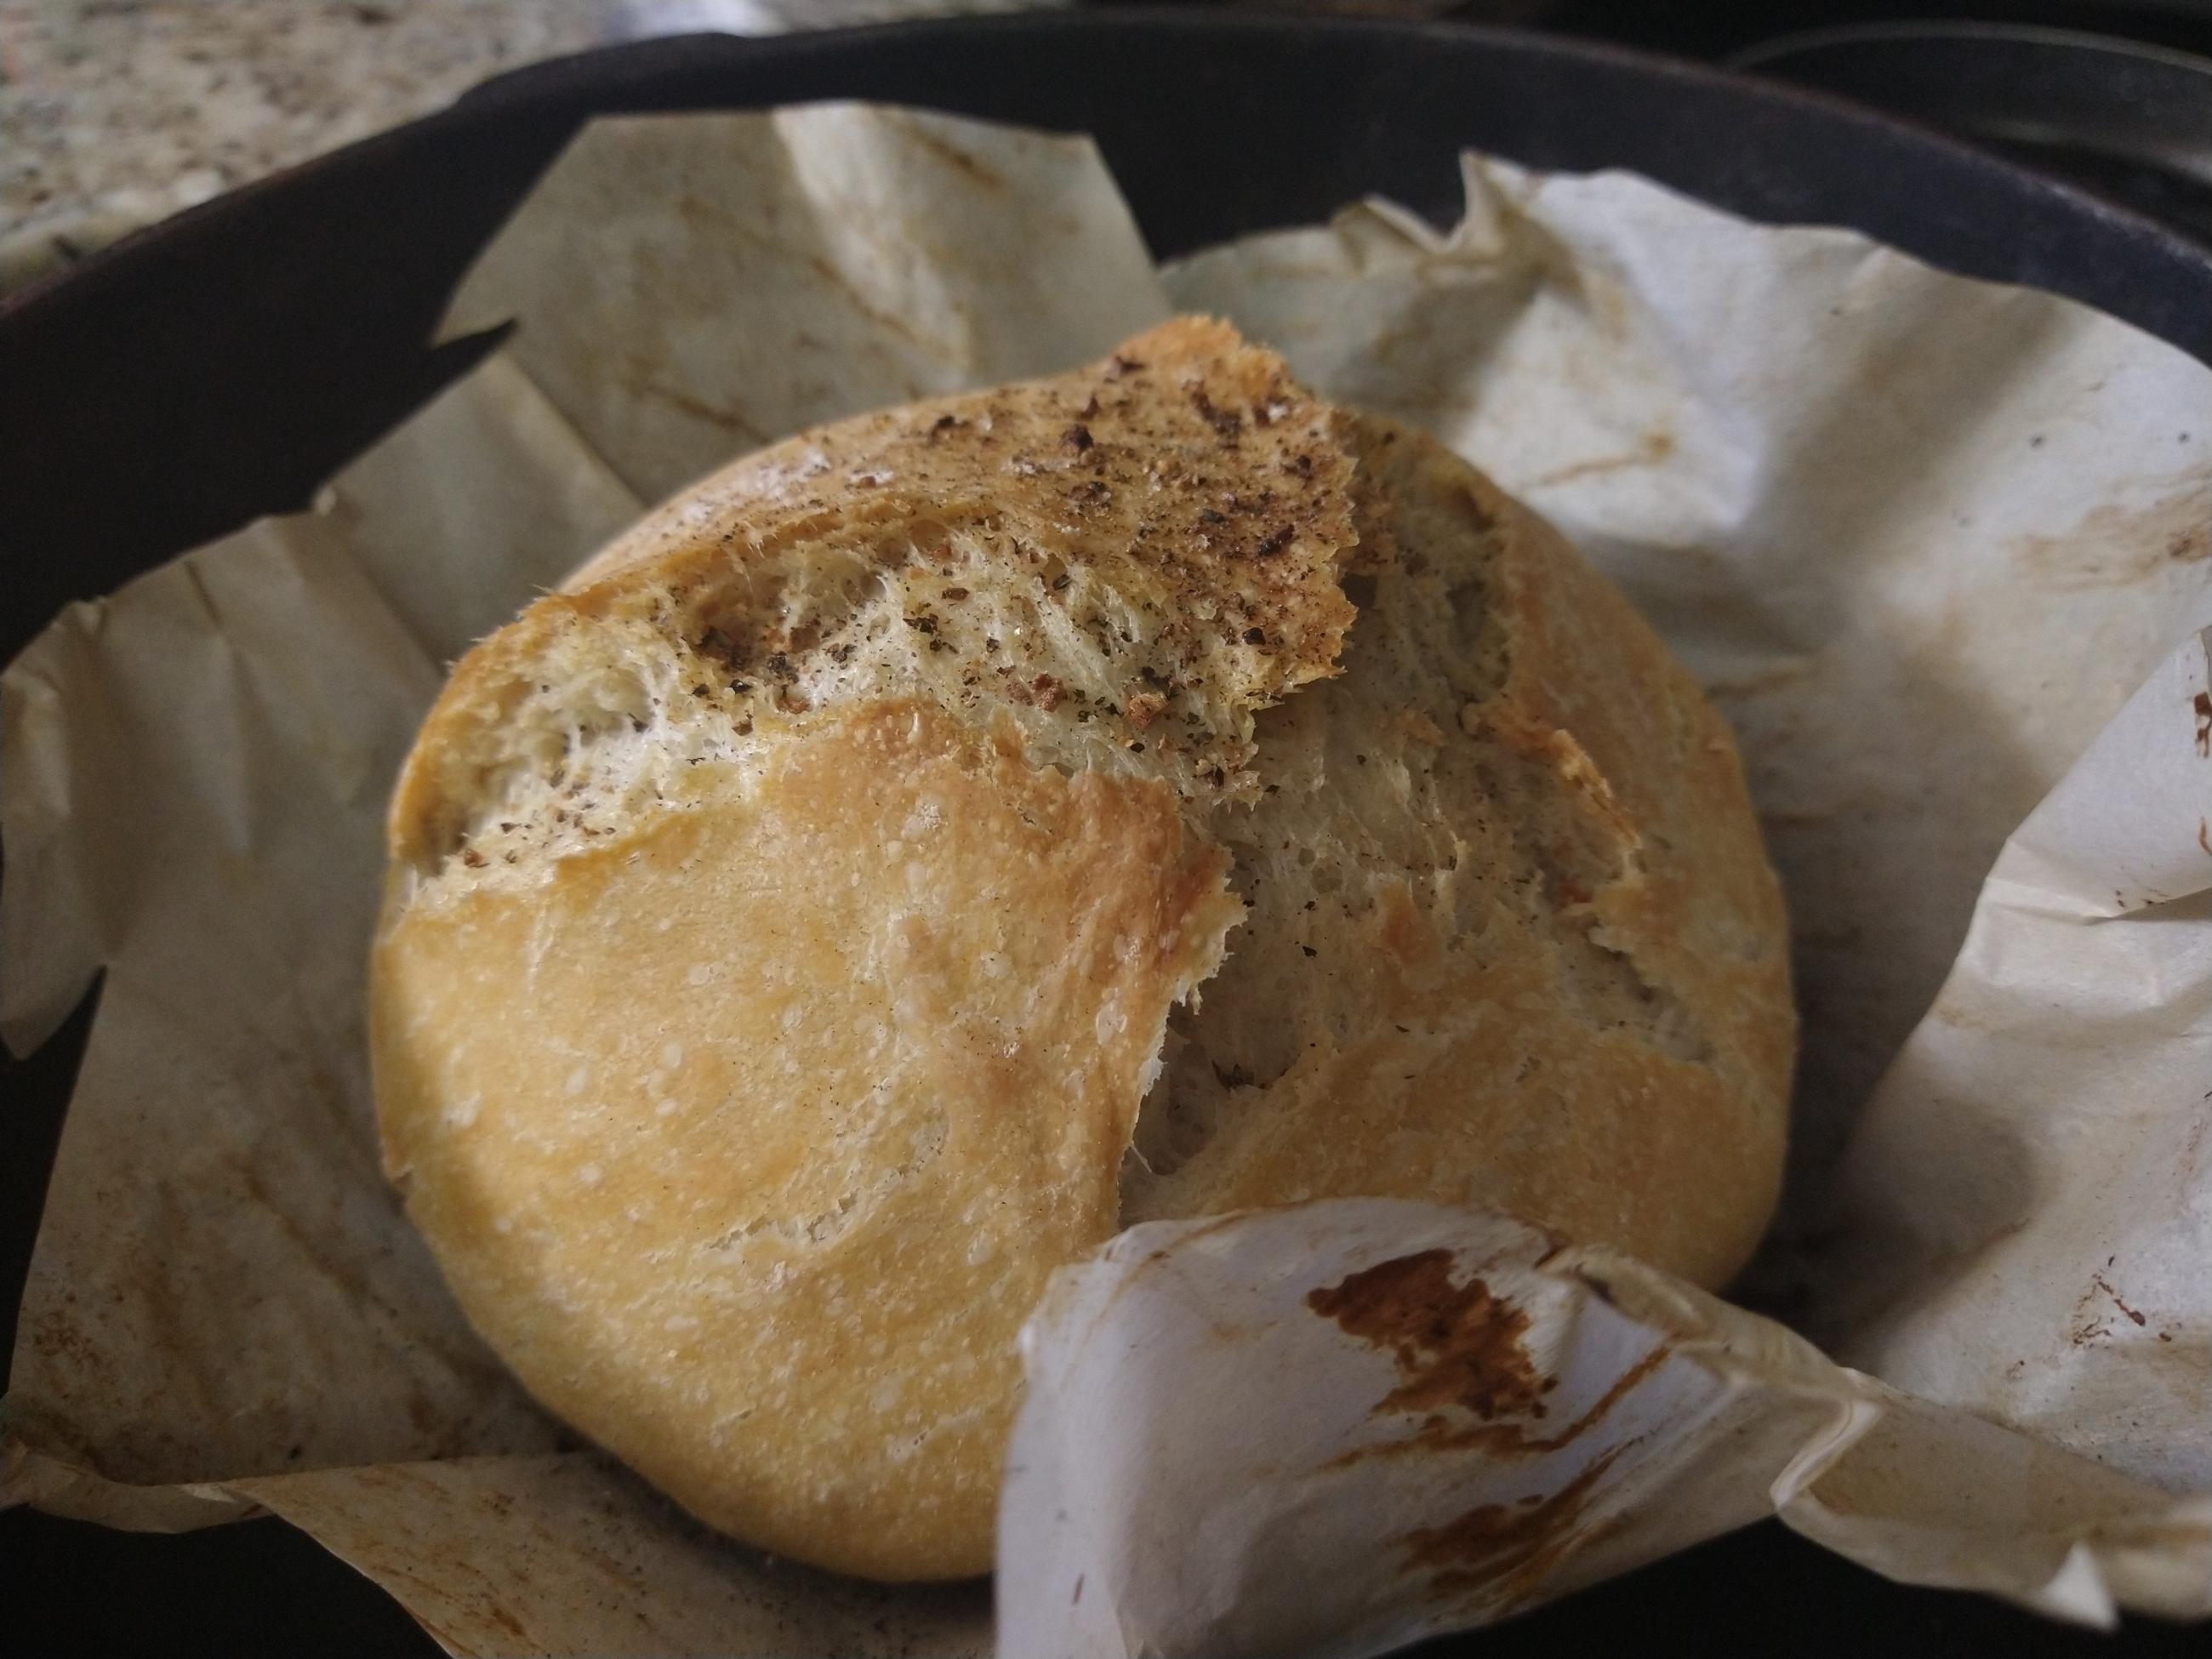 Bread bowl for soups or chili